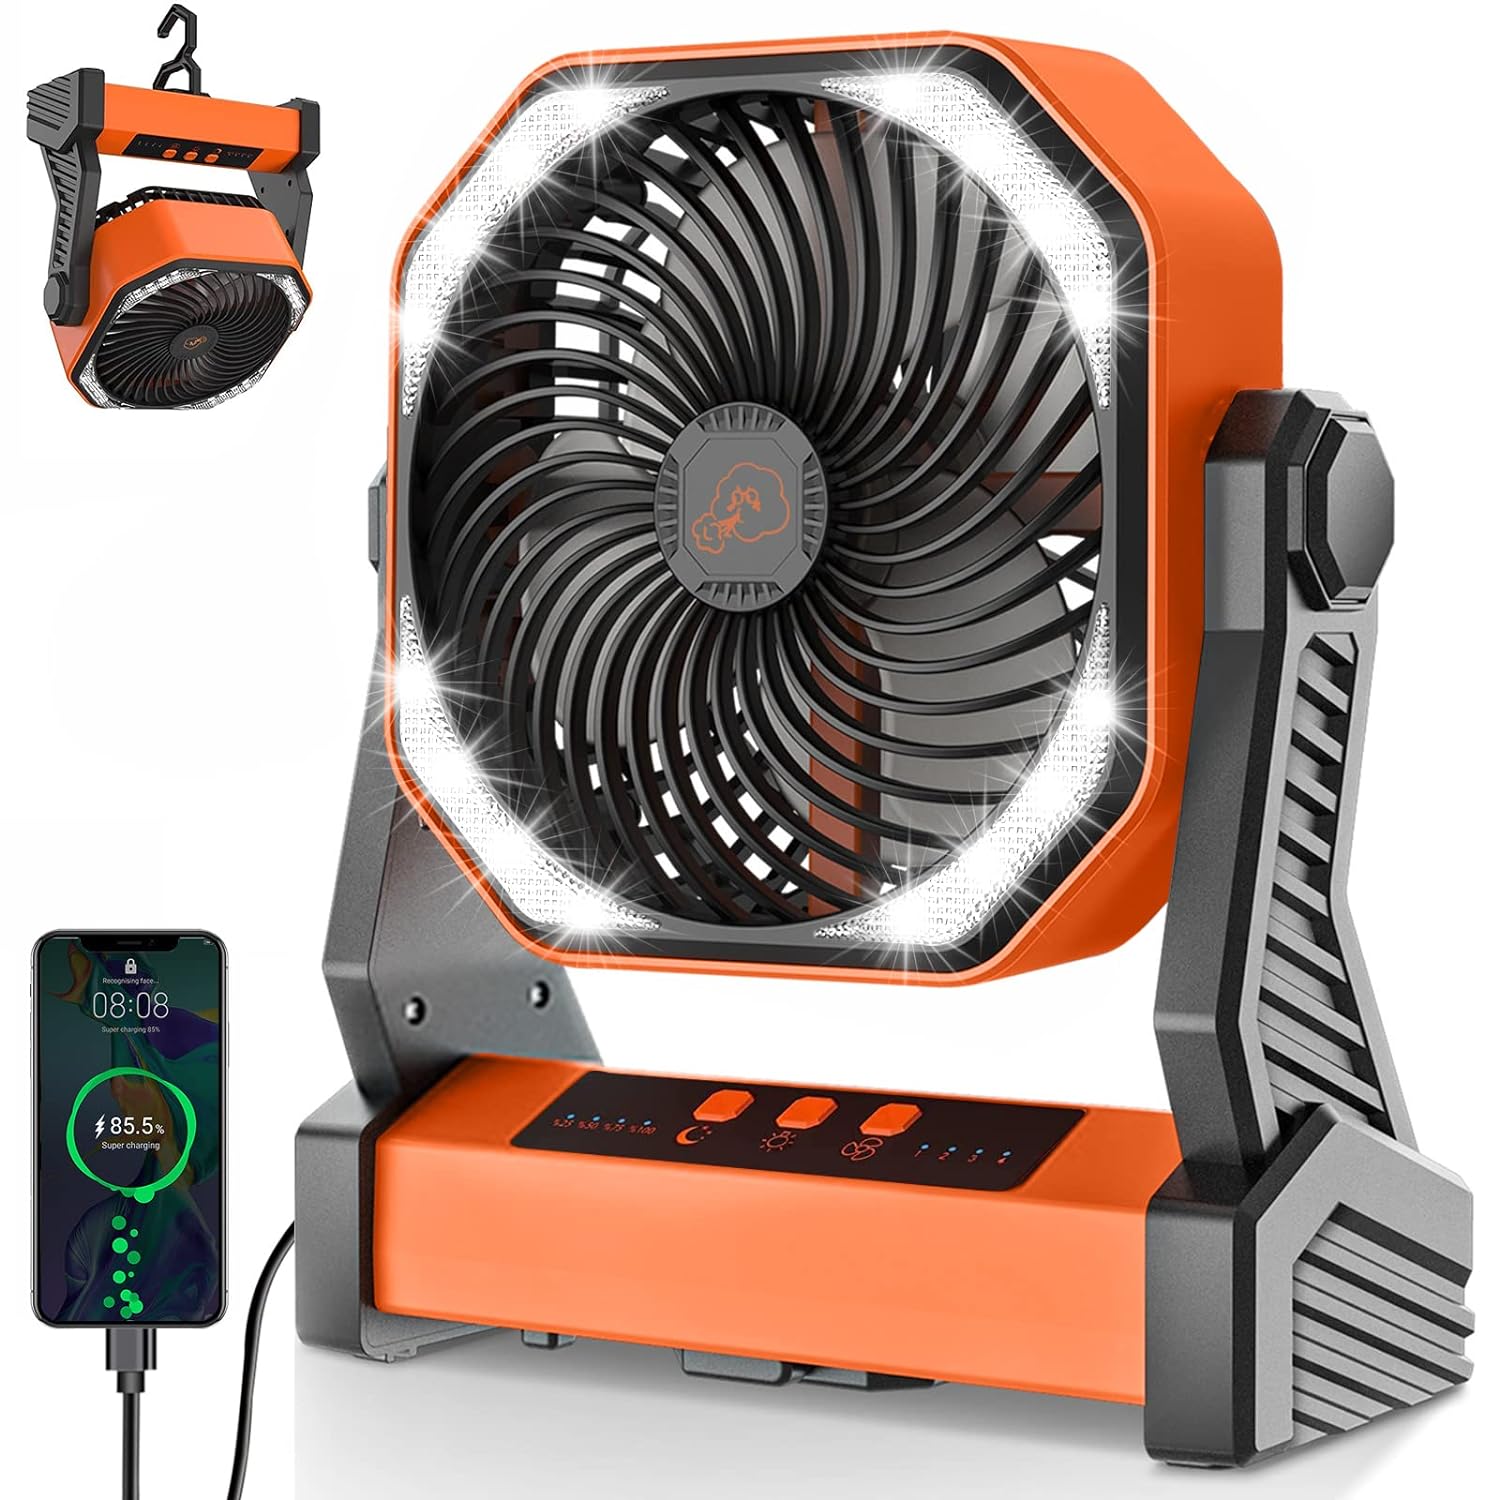 20000mAh Camping Fan with LED Lantern, 8 inch Battery Operated Fan, USB Rechargeable Tent Fan Outdoor Power Bank Portable Fan with Hook for Hiking Camping Fishing Emergency Survival (Building Orange)